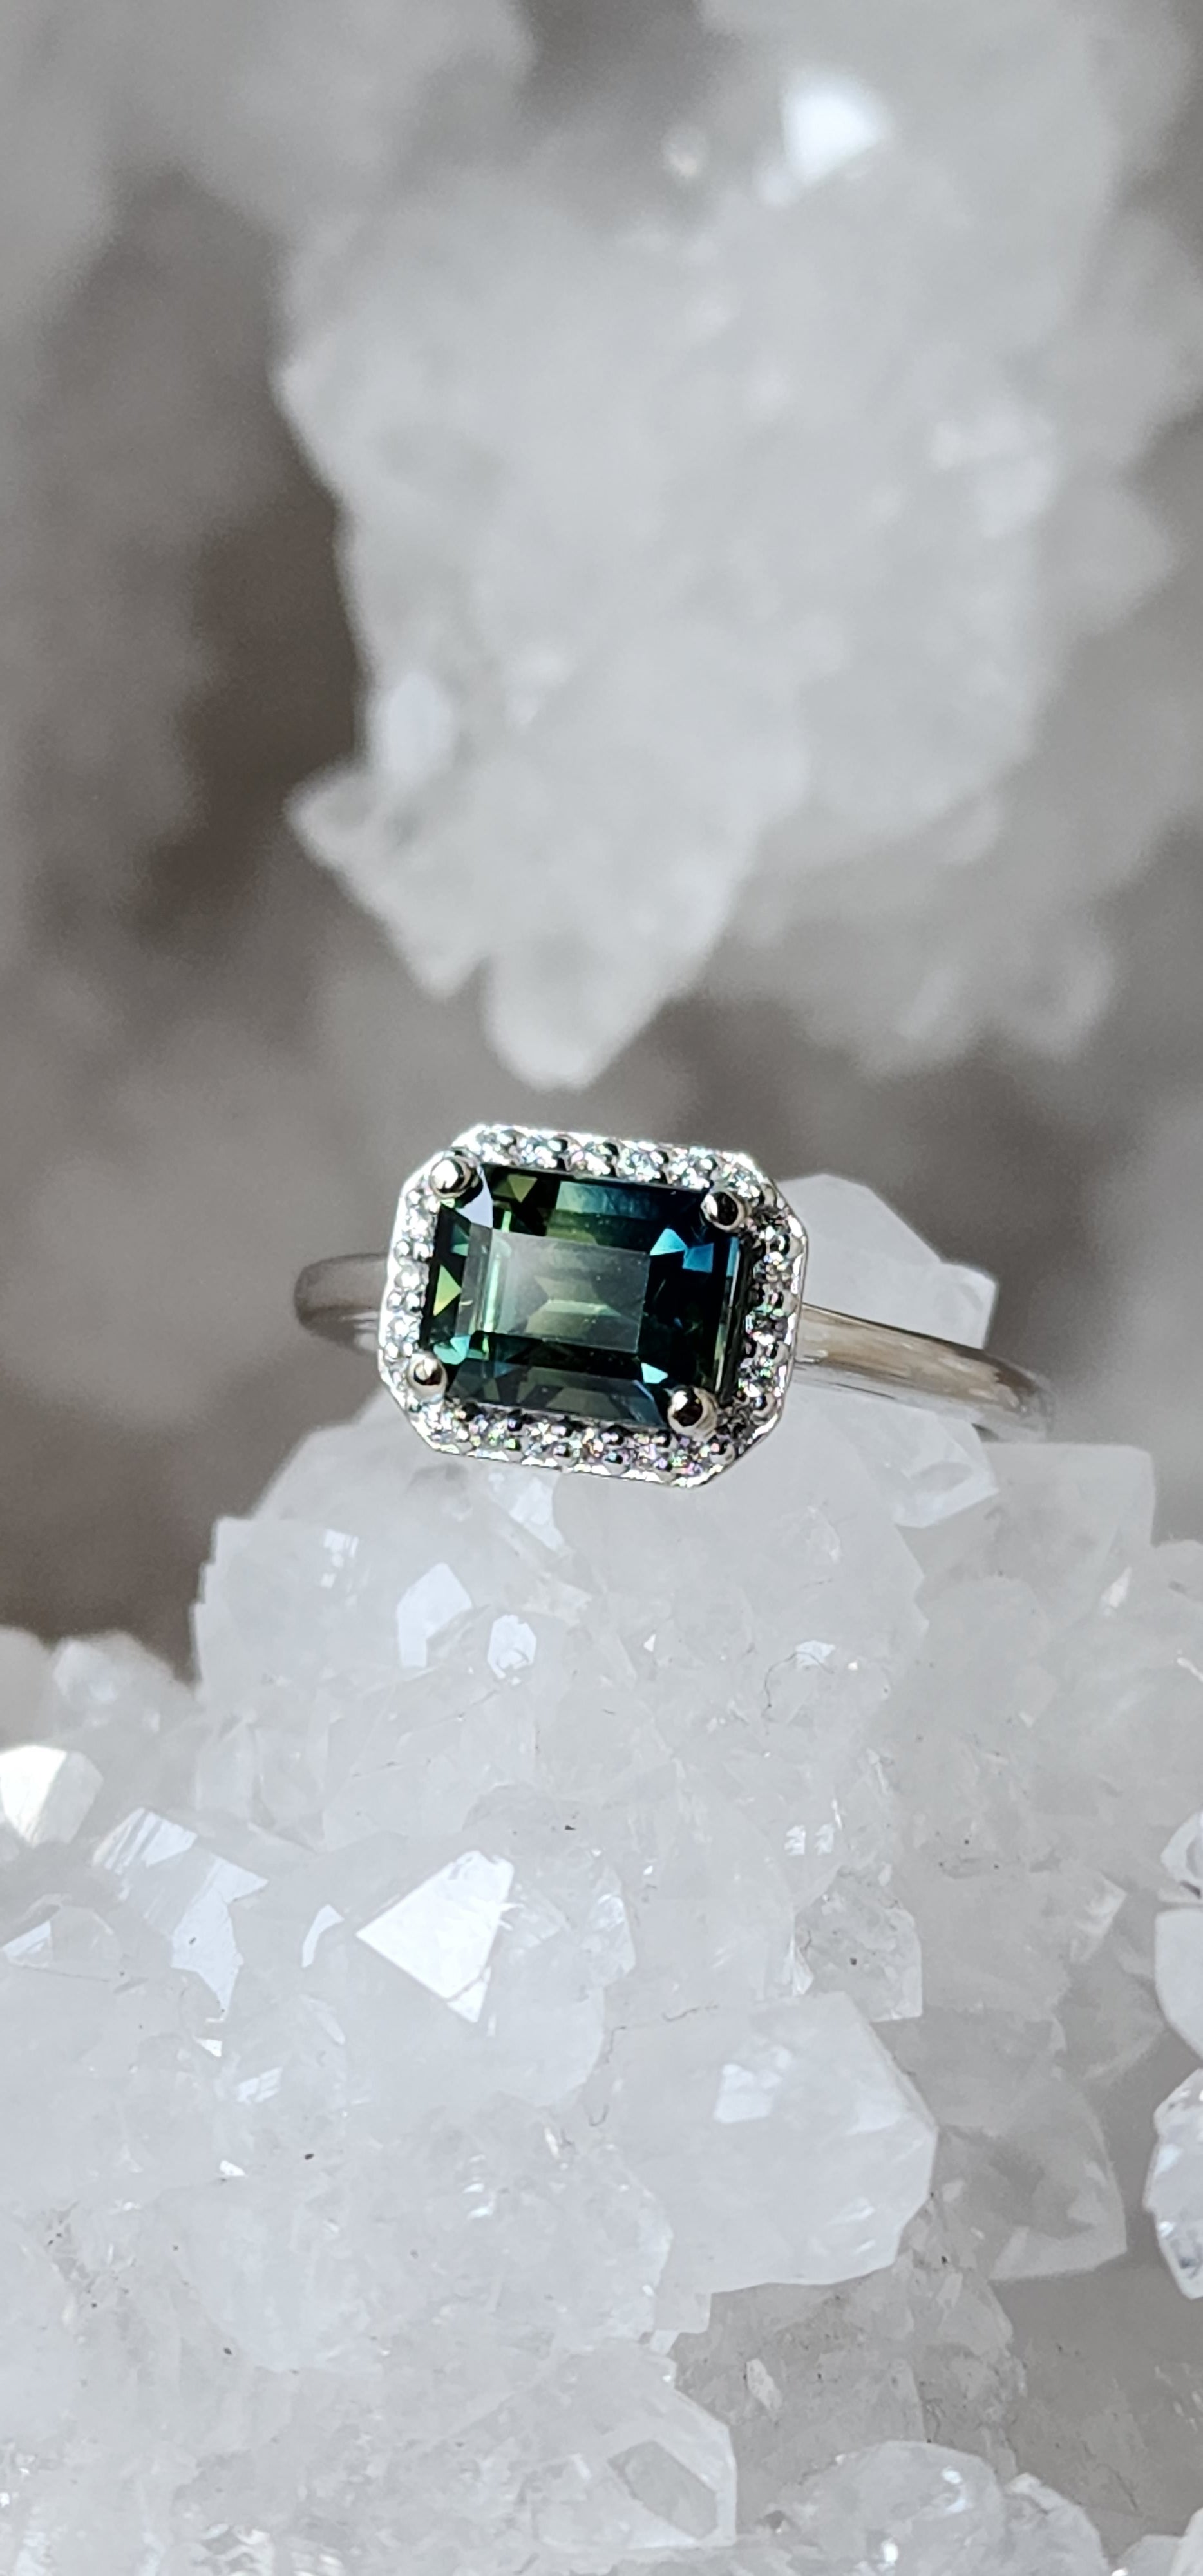 Ring - 2.32 CT Madagascar Sapphire - Parti Colored Emerald Cut with a Diamond Halo in an East to West Setting